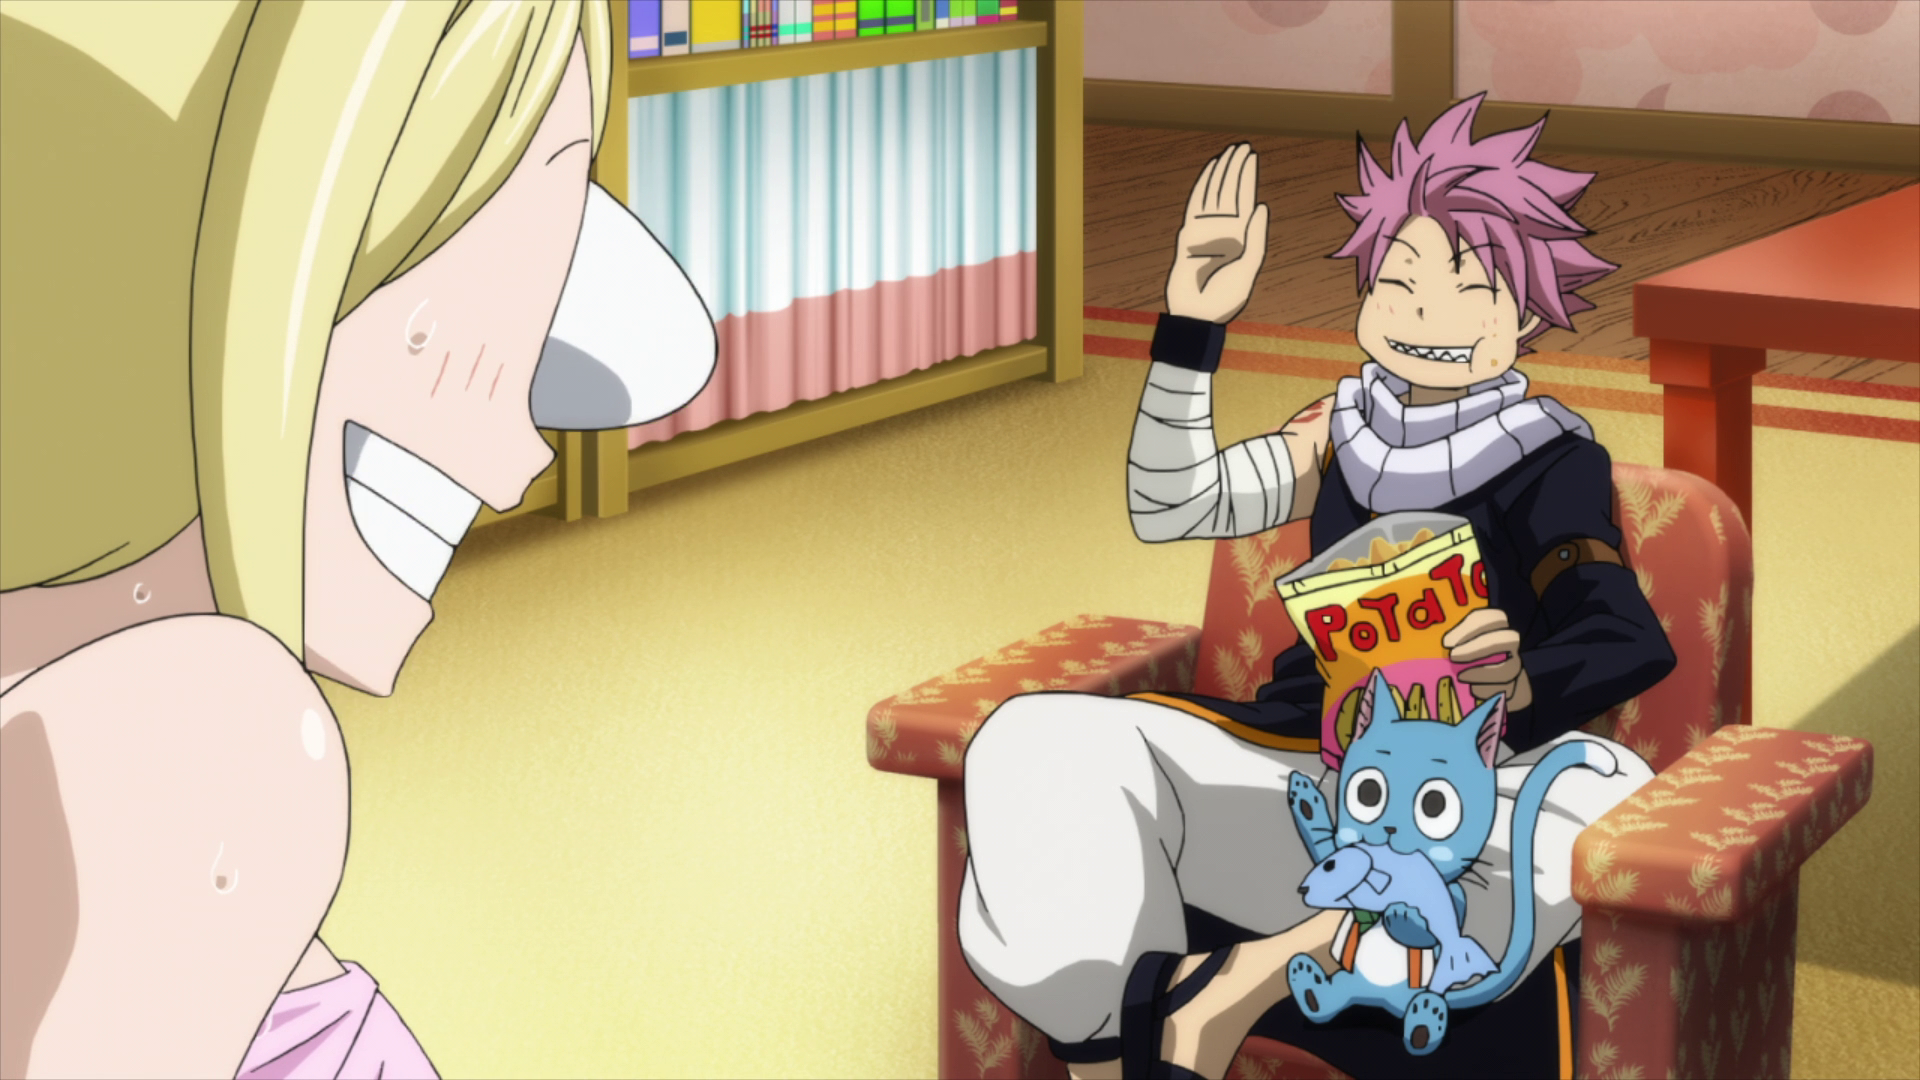 Fairy Tail Guild Masters Mobile Game Announced – OTAQUEST